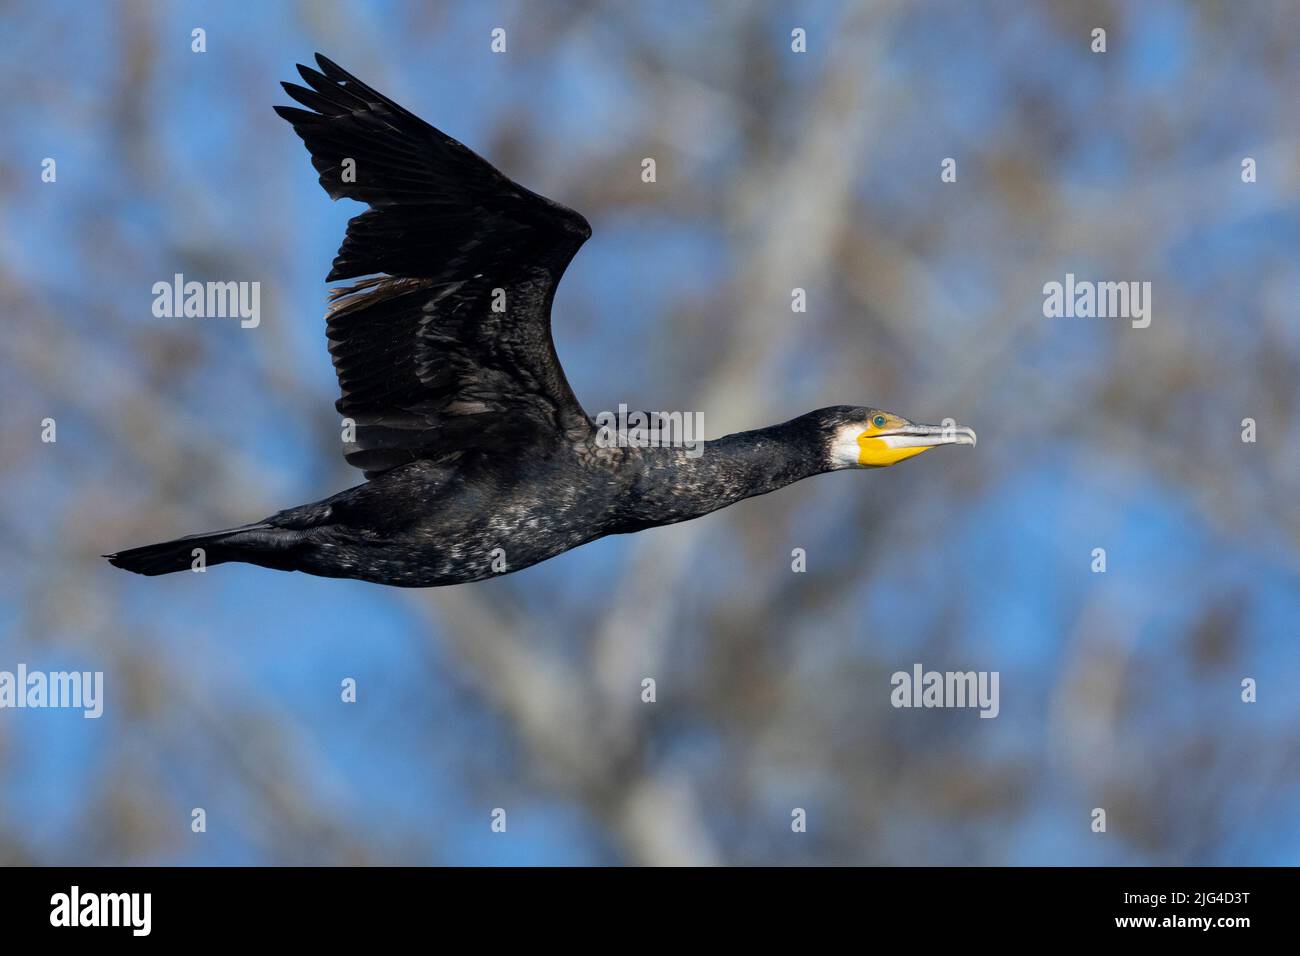 Great Cormorant (Phalacrocorax carbo sinensis), side view of an immature individual in flight, Campania, Italy Stock Photo